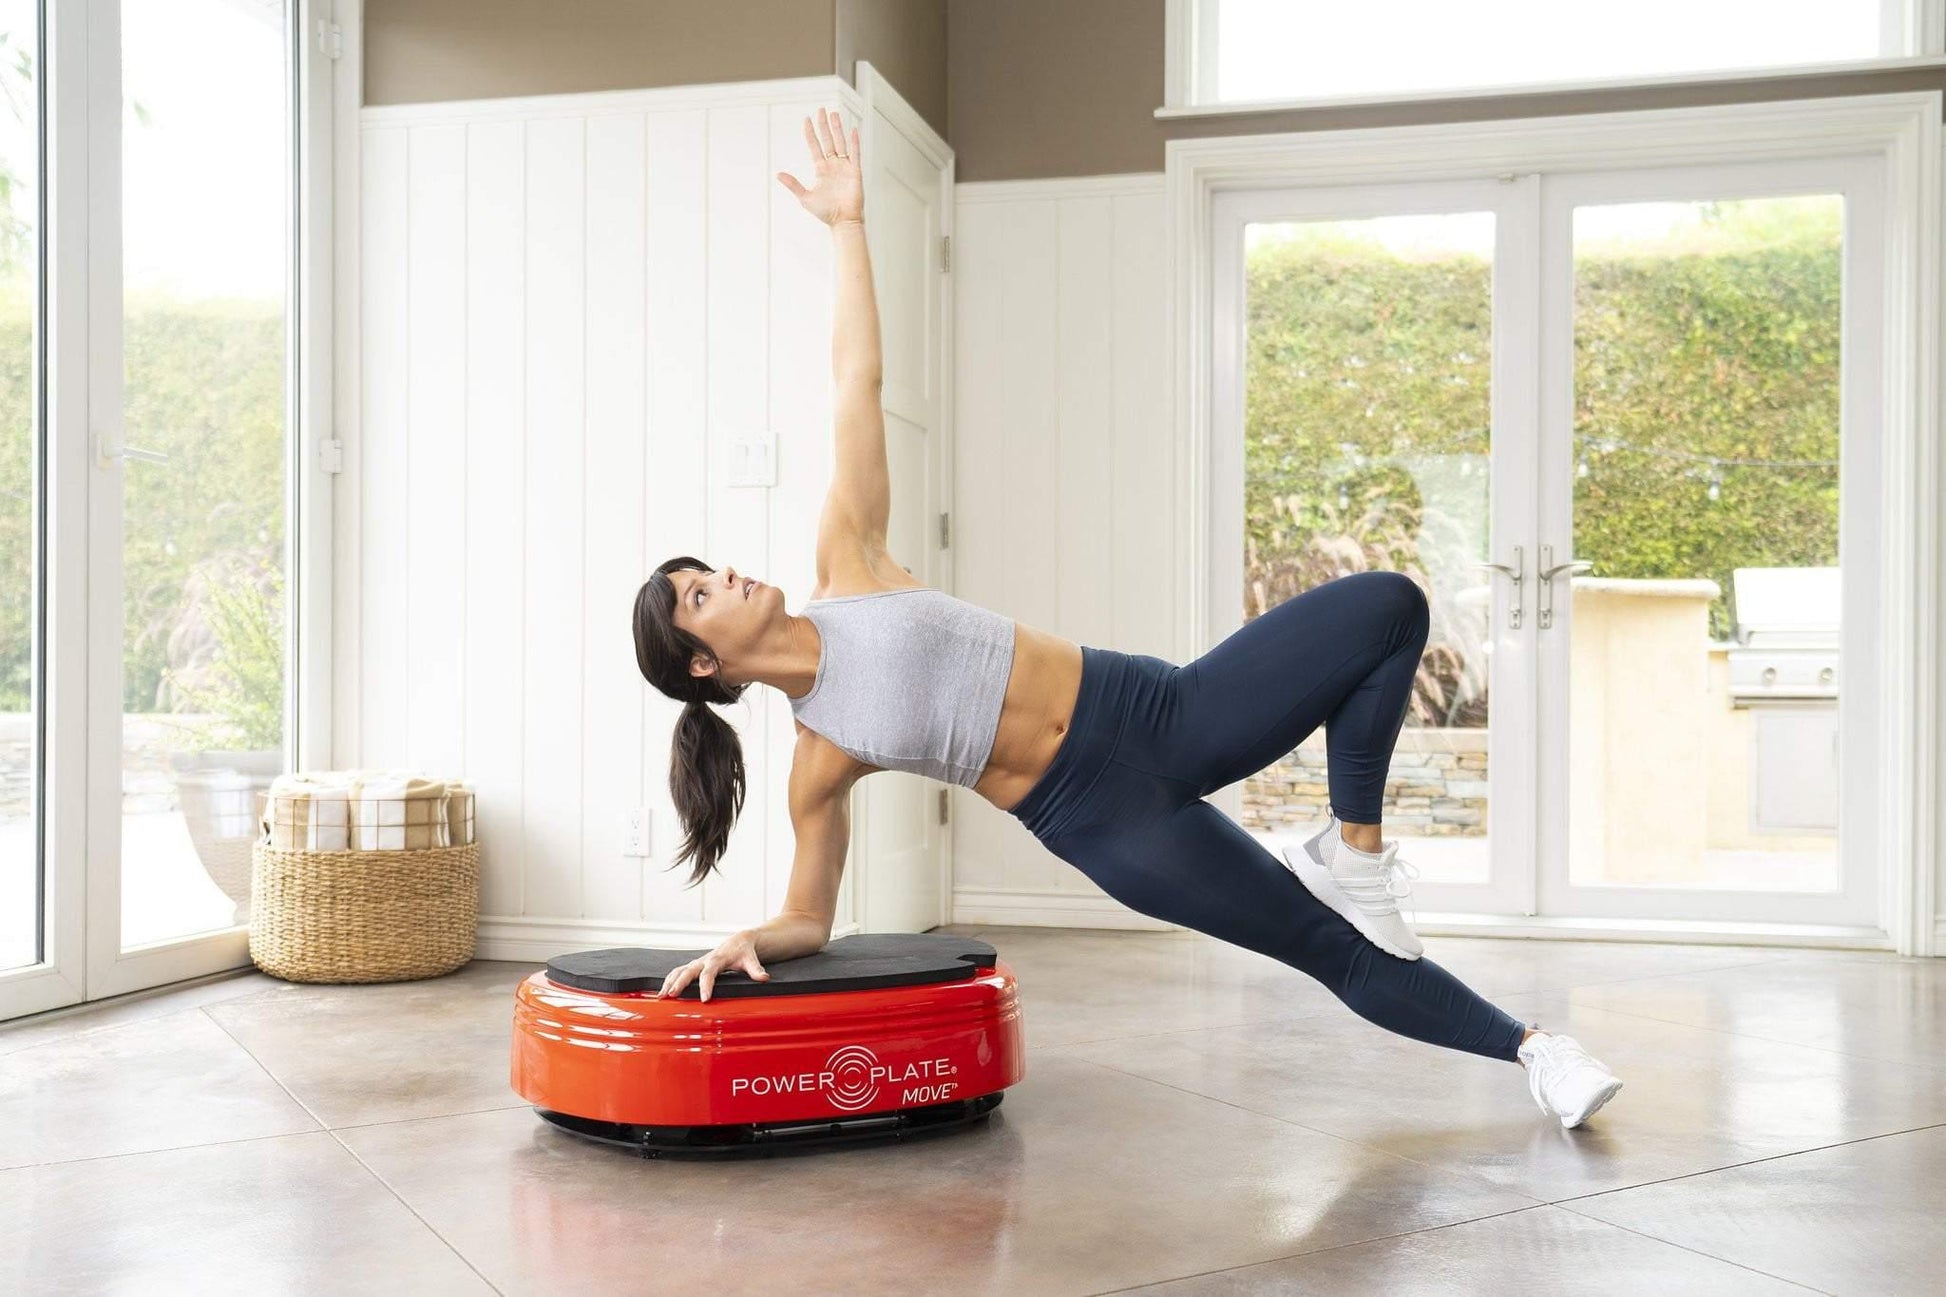 Power Plate Move Vibration Power Plate 